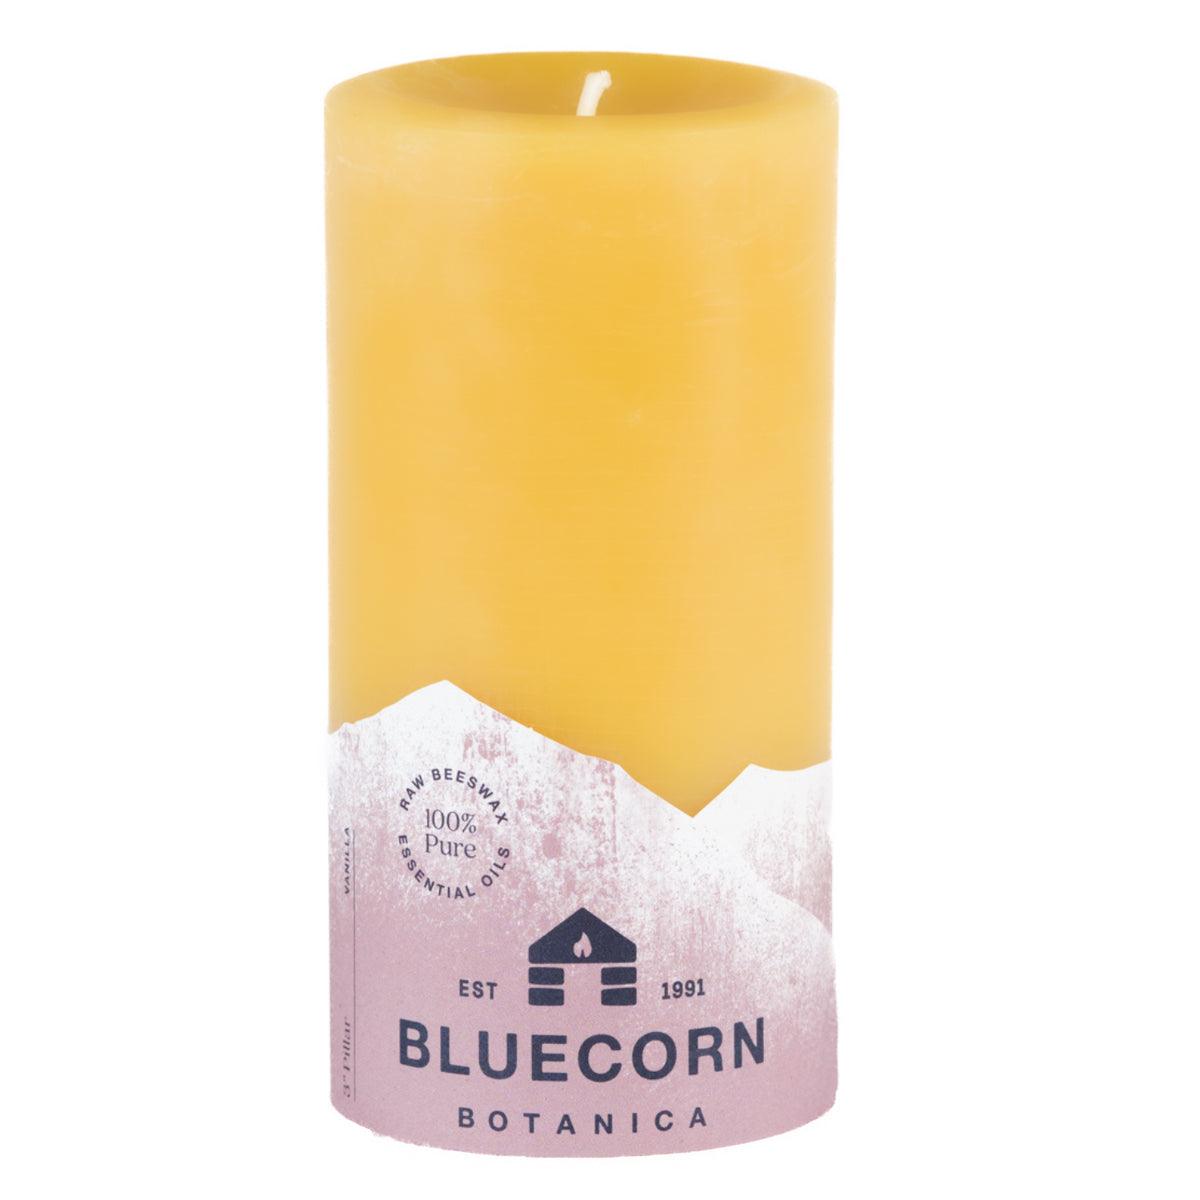 Bluecorn Botanica 100% Pure Beeswax Vanilla 3" x 6" Scented Pillar Candle. Burn Time: 90 hours. Made with 100% Pure Beeswax, 100% Pure Essential Oils, and a 100% pure cotton wick, no lead. Candles are paraffin free, clean burning and non-toxic. Features Bluecorn Botanica label in Brown printed on 100% recycled paper. Wax is golden in color.